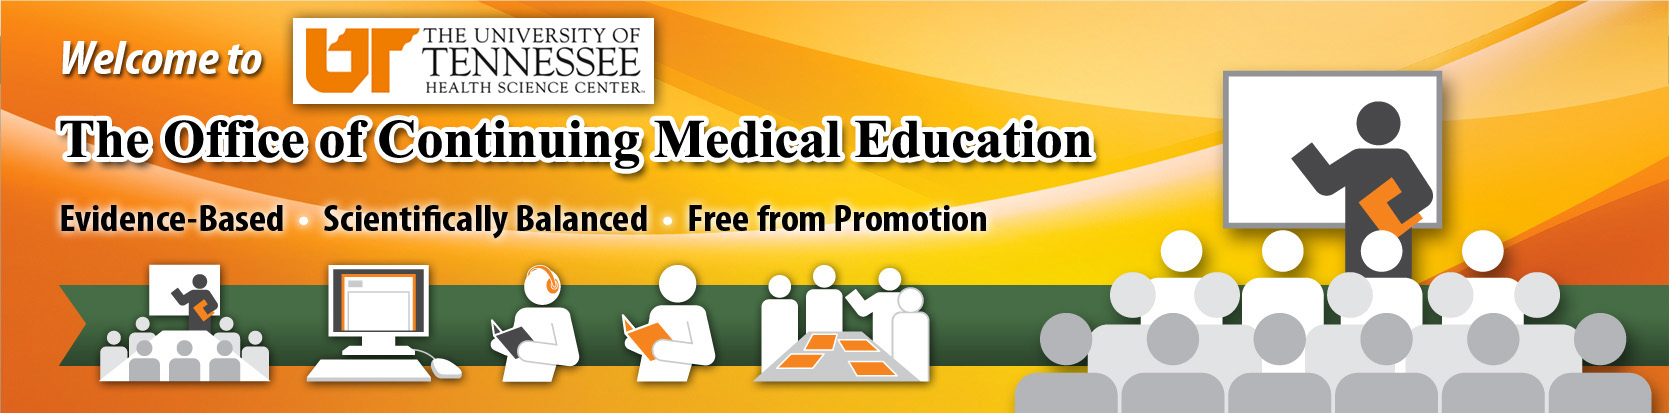 Office of CME Continuing Medical Education